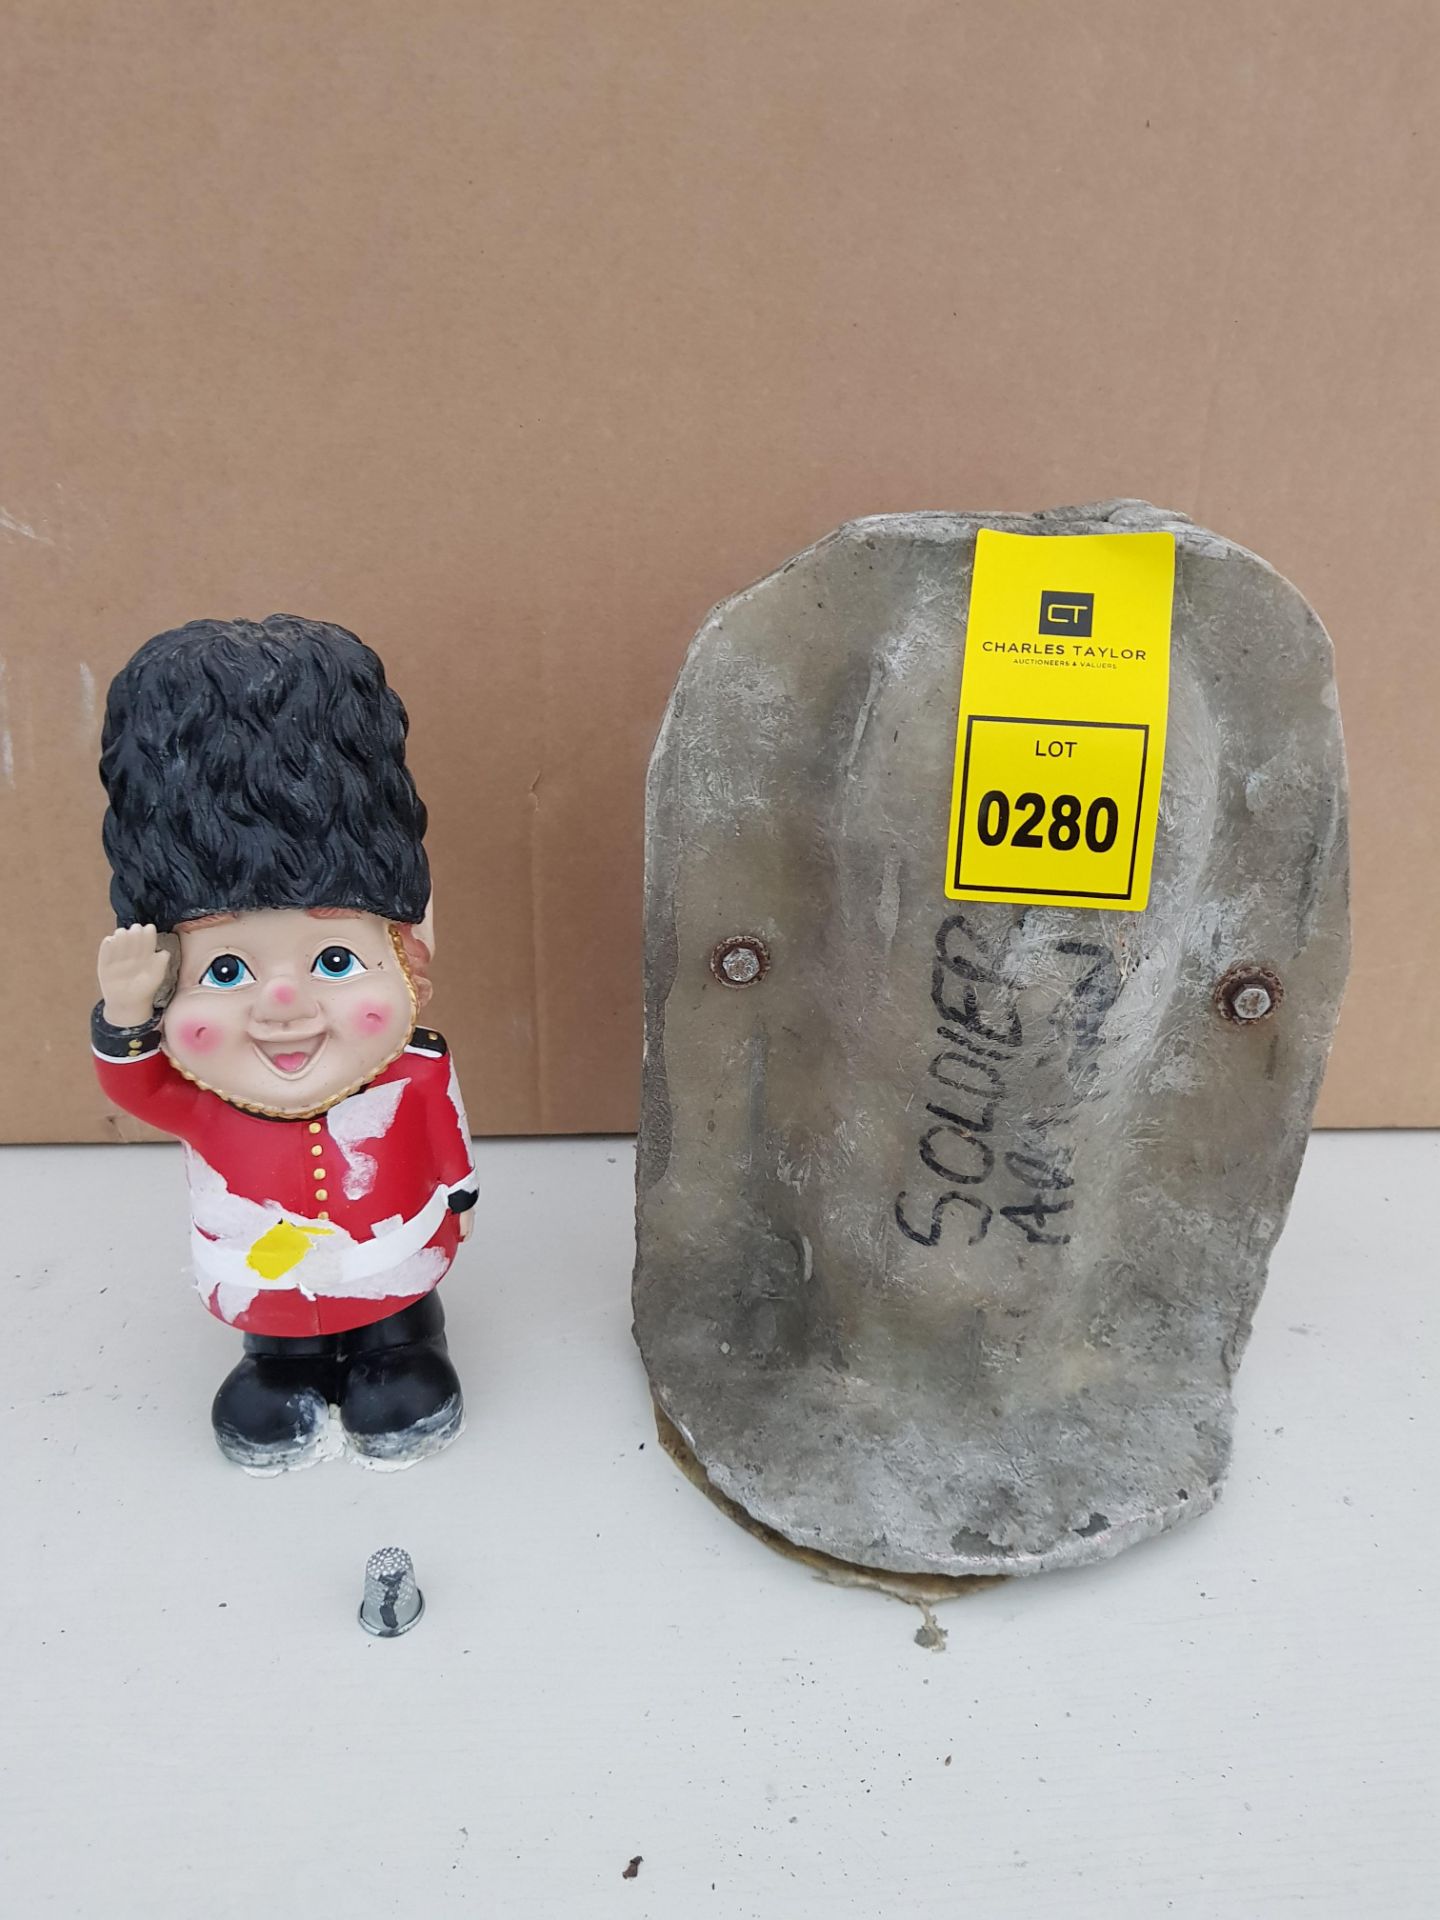 26CM LONDON GUARD MASTER CAST WITH LATEX SLIP & FIBRE GLASS MOULD (FOR CASTING PRODUCT TO RETAIL £